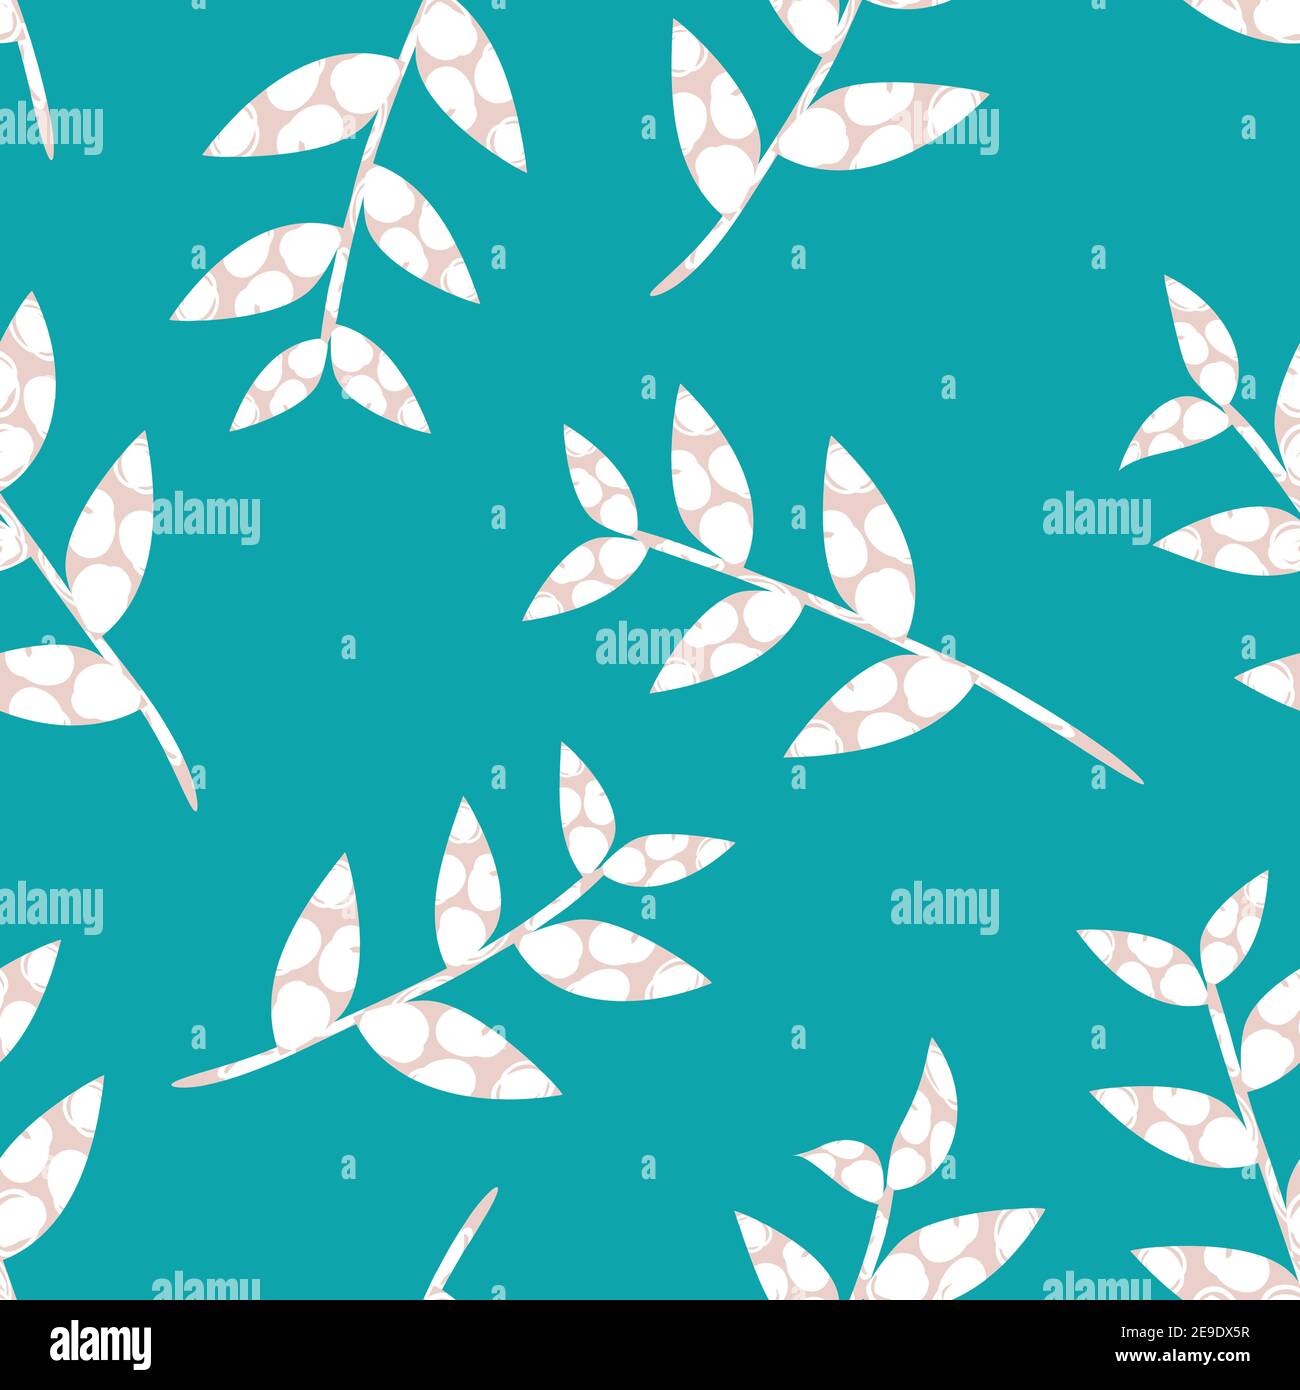 Mono print style scattered leaf stems seamless vector pattern background. Lino cut effect textured scattered foliage on aqua blue backdrop. Minimal Stock Vector